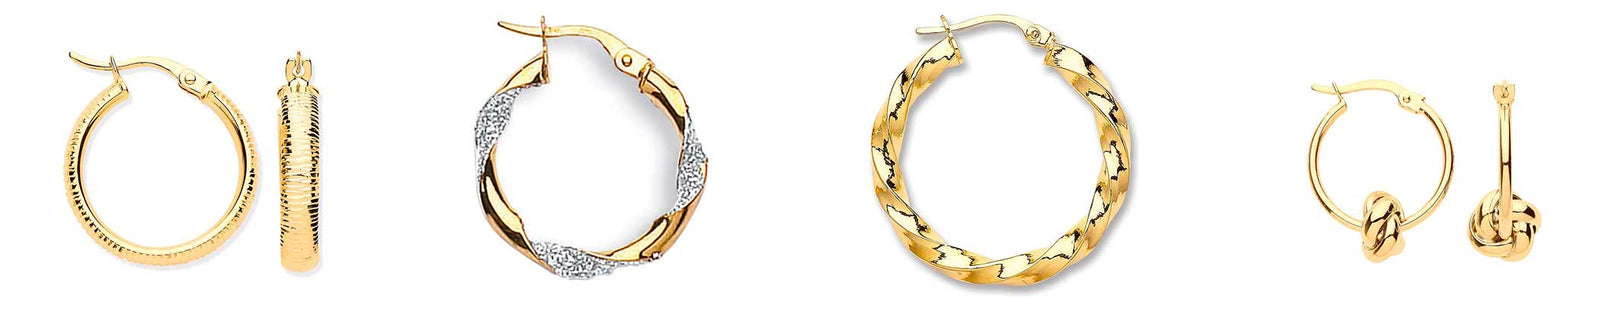 hoops with word earrings backs for studs of Hollow-out Earrings